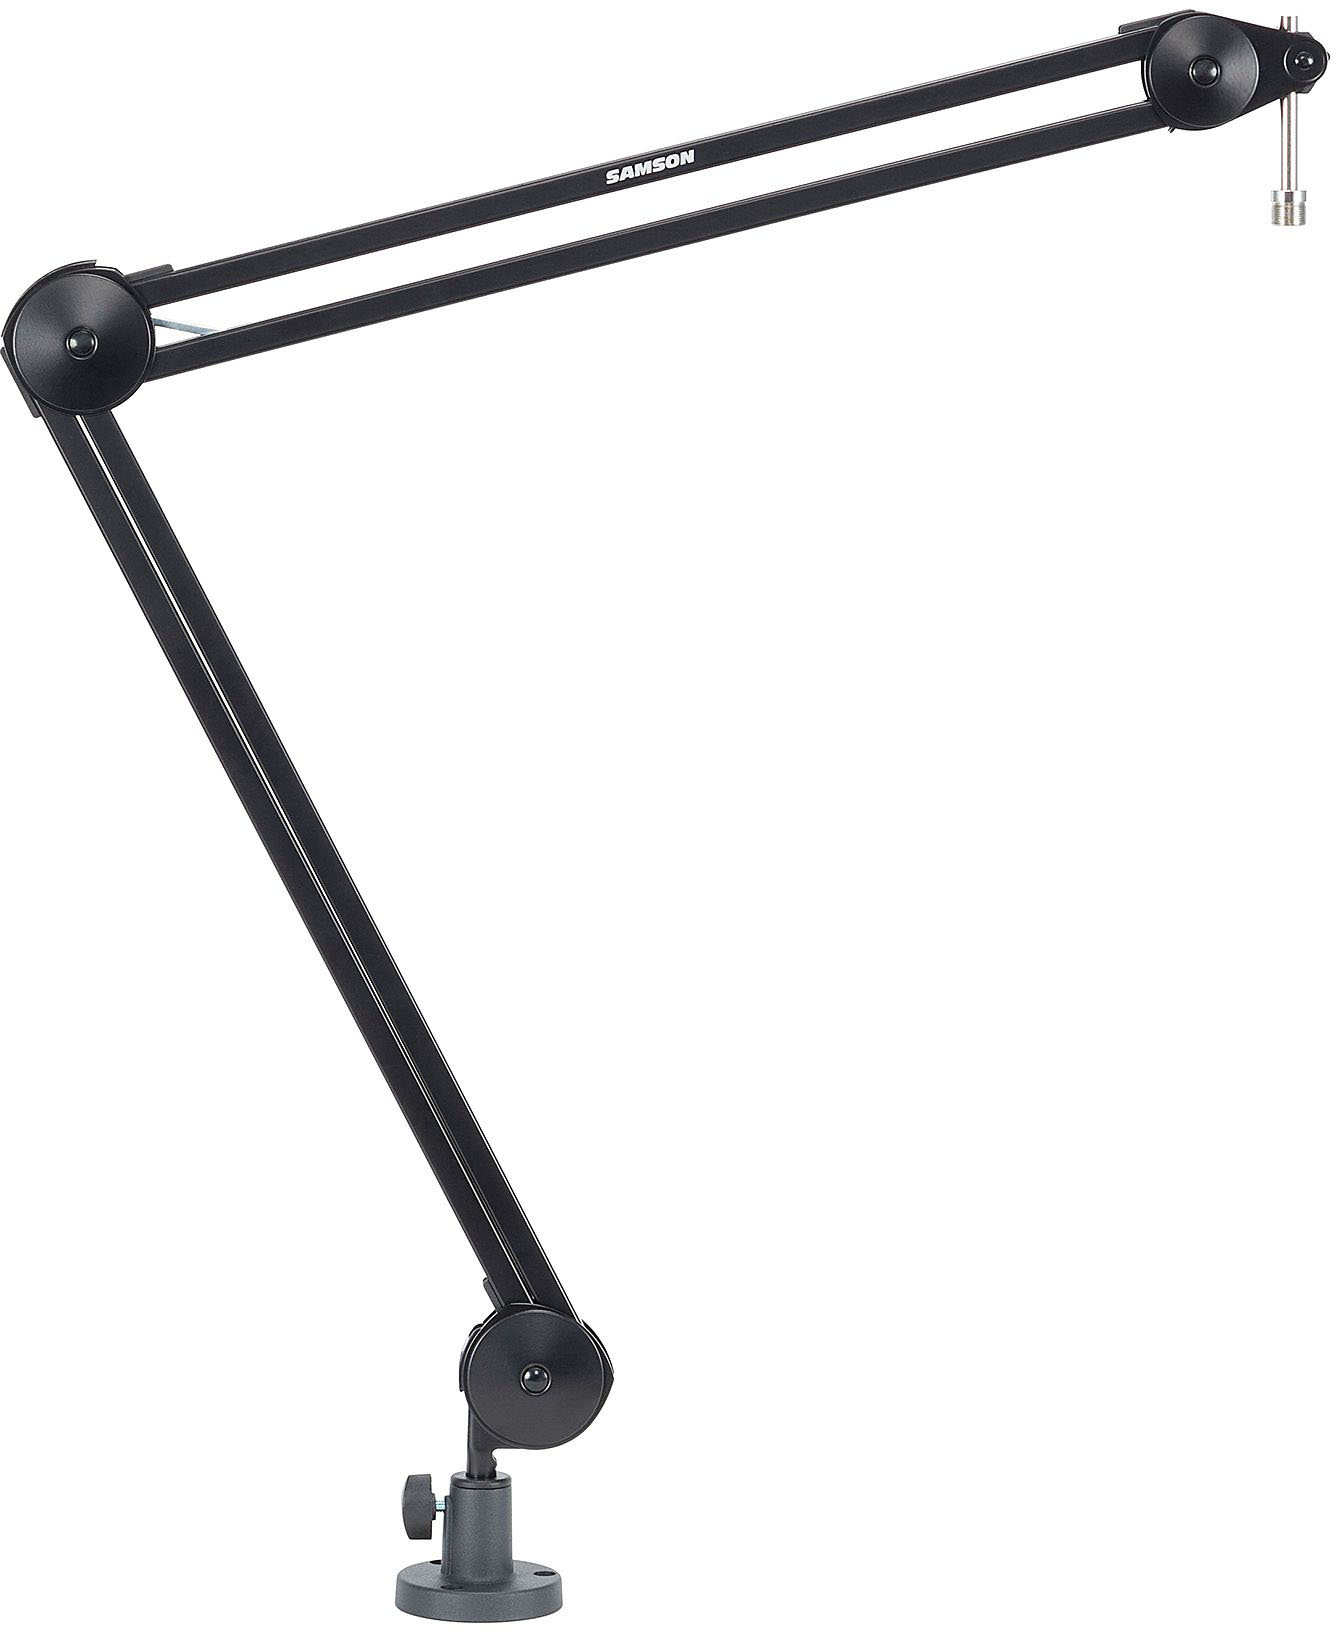 Left View: Samson MBA38 38" Microphone Boom Arm Podcast Stand+Pop Filter+Silver ShockMount